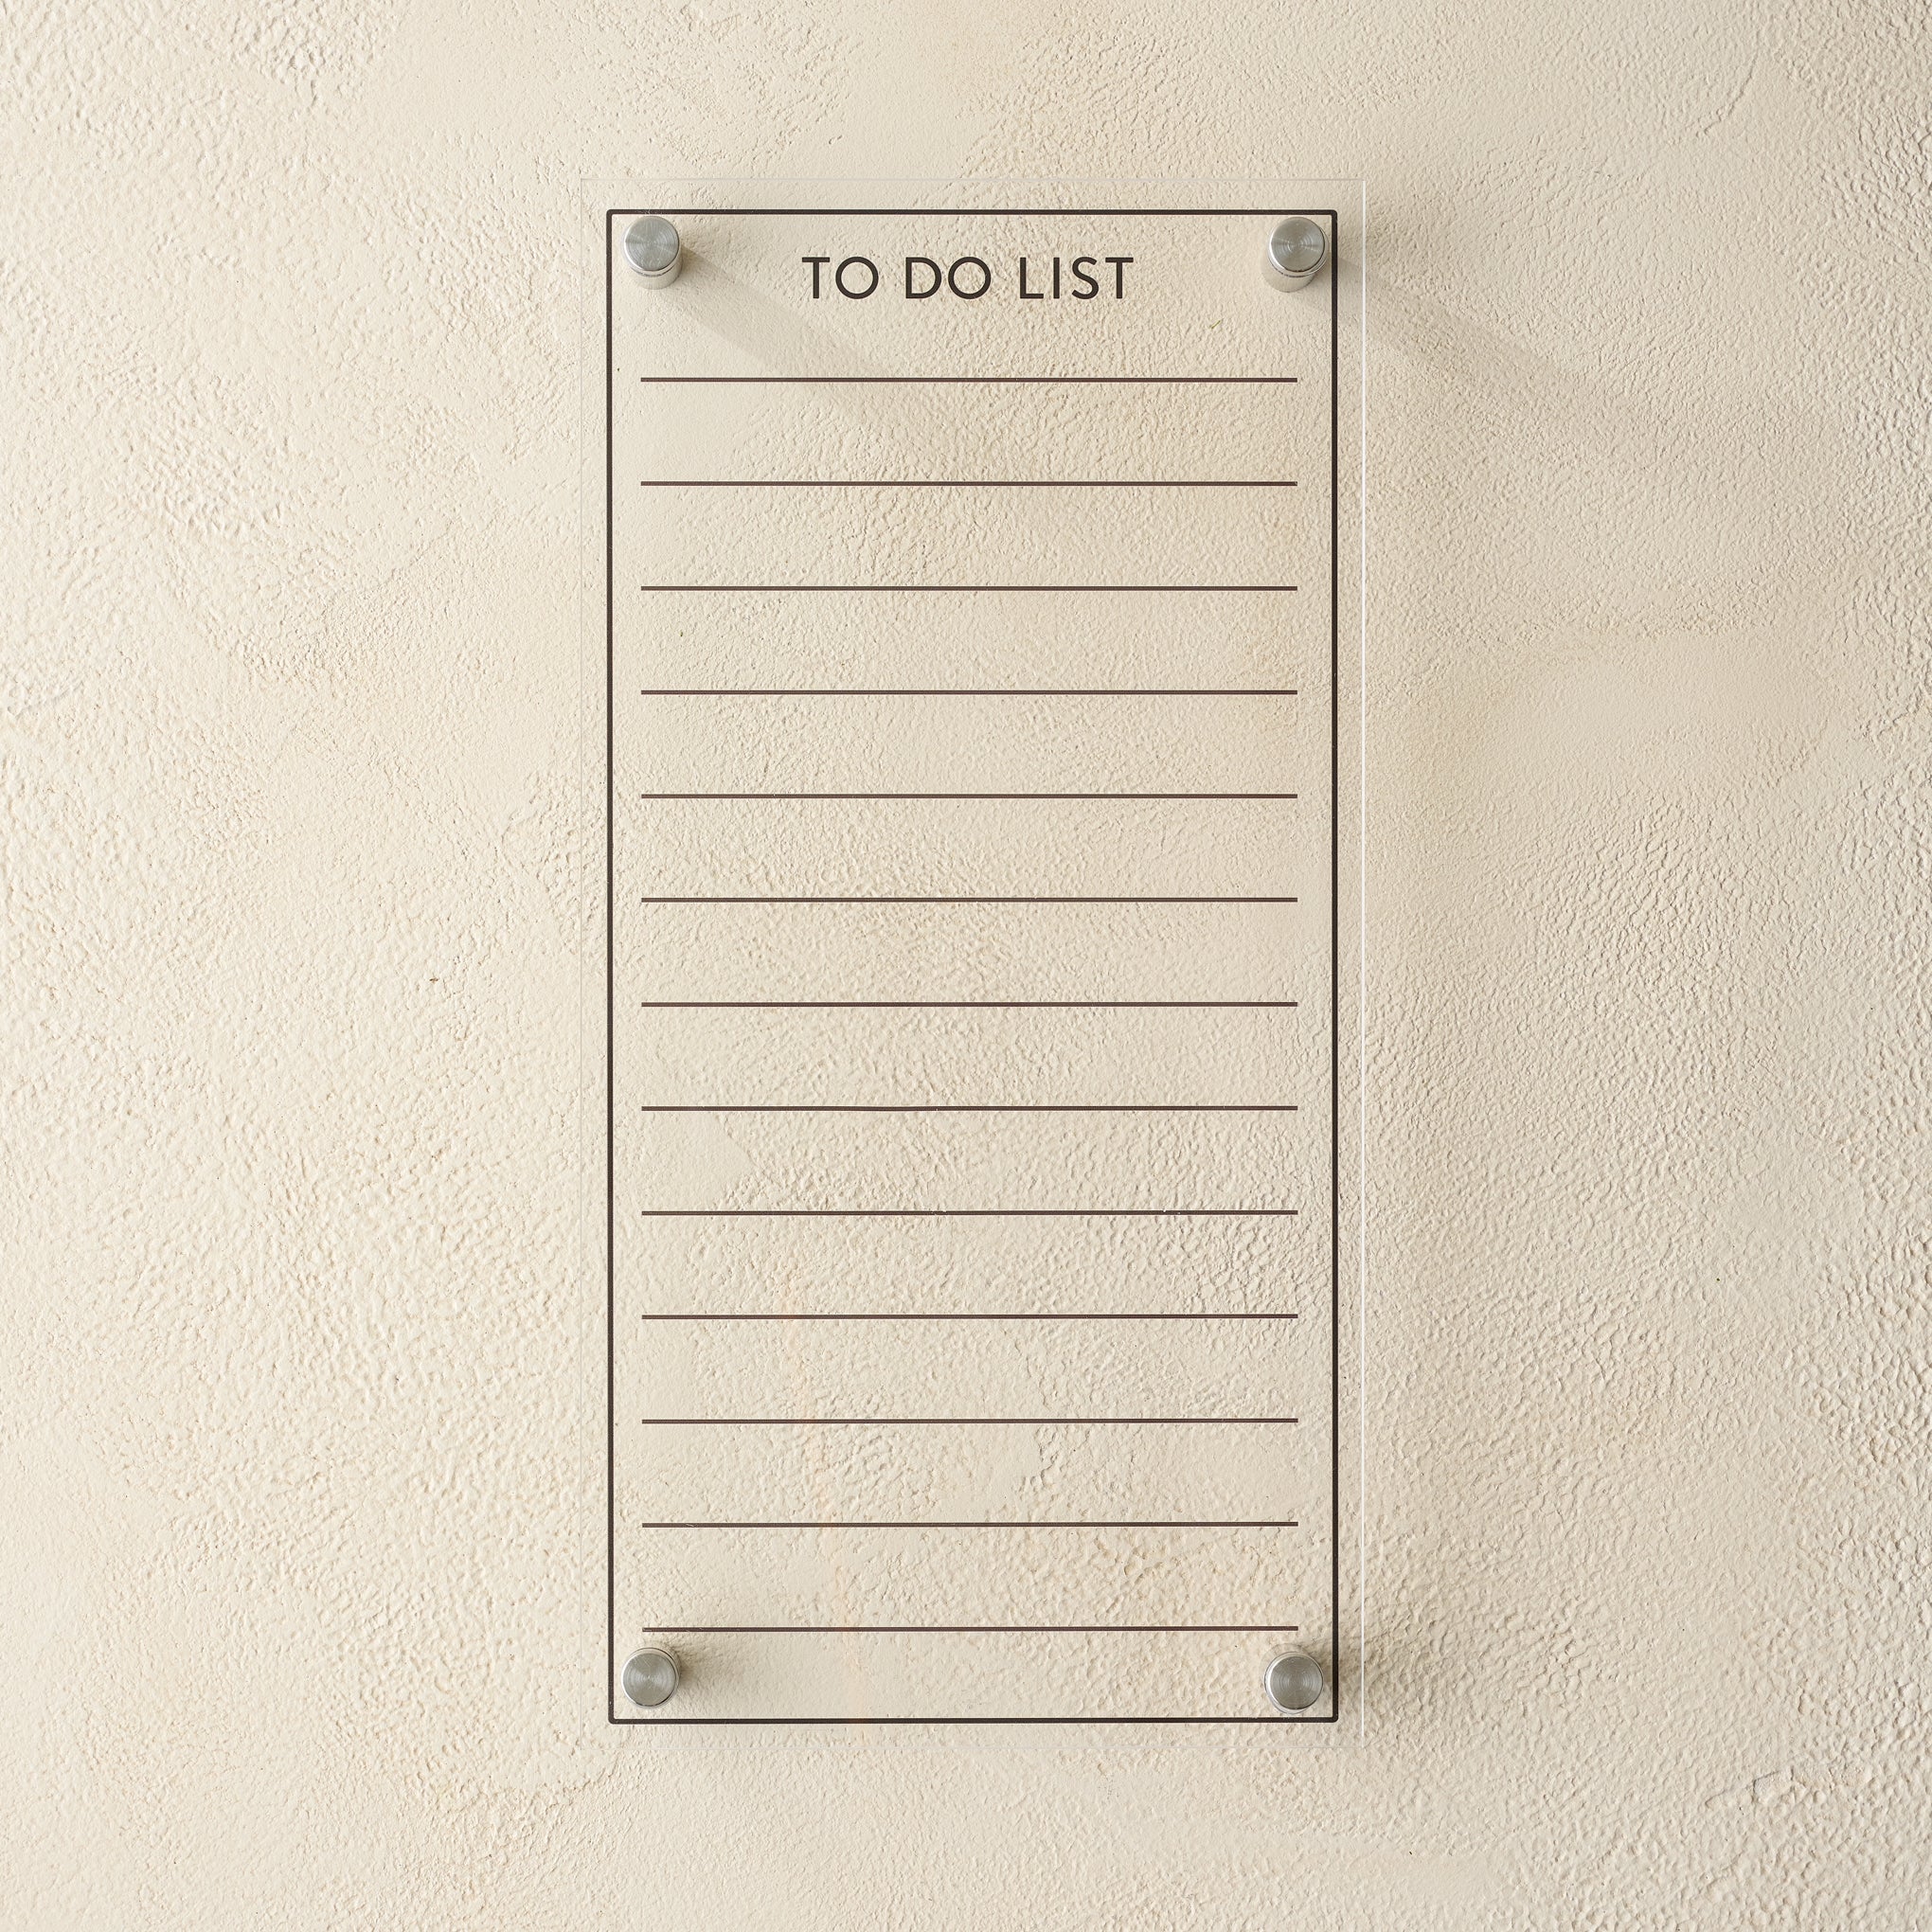 Acrylic To-Do List On sale for $19.20, discounted from $32.00